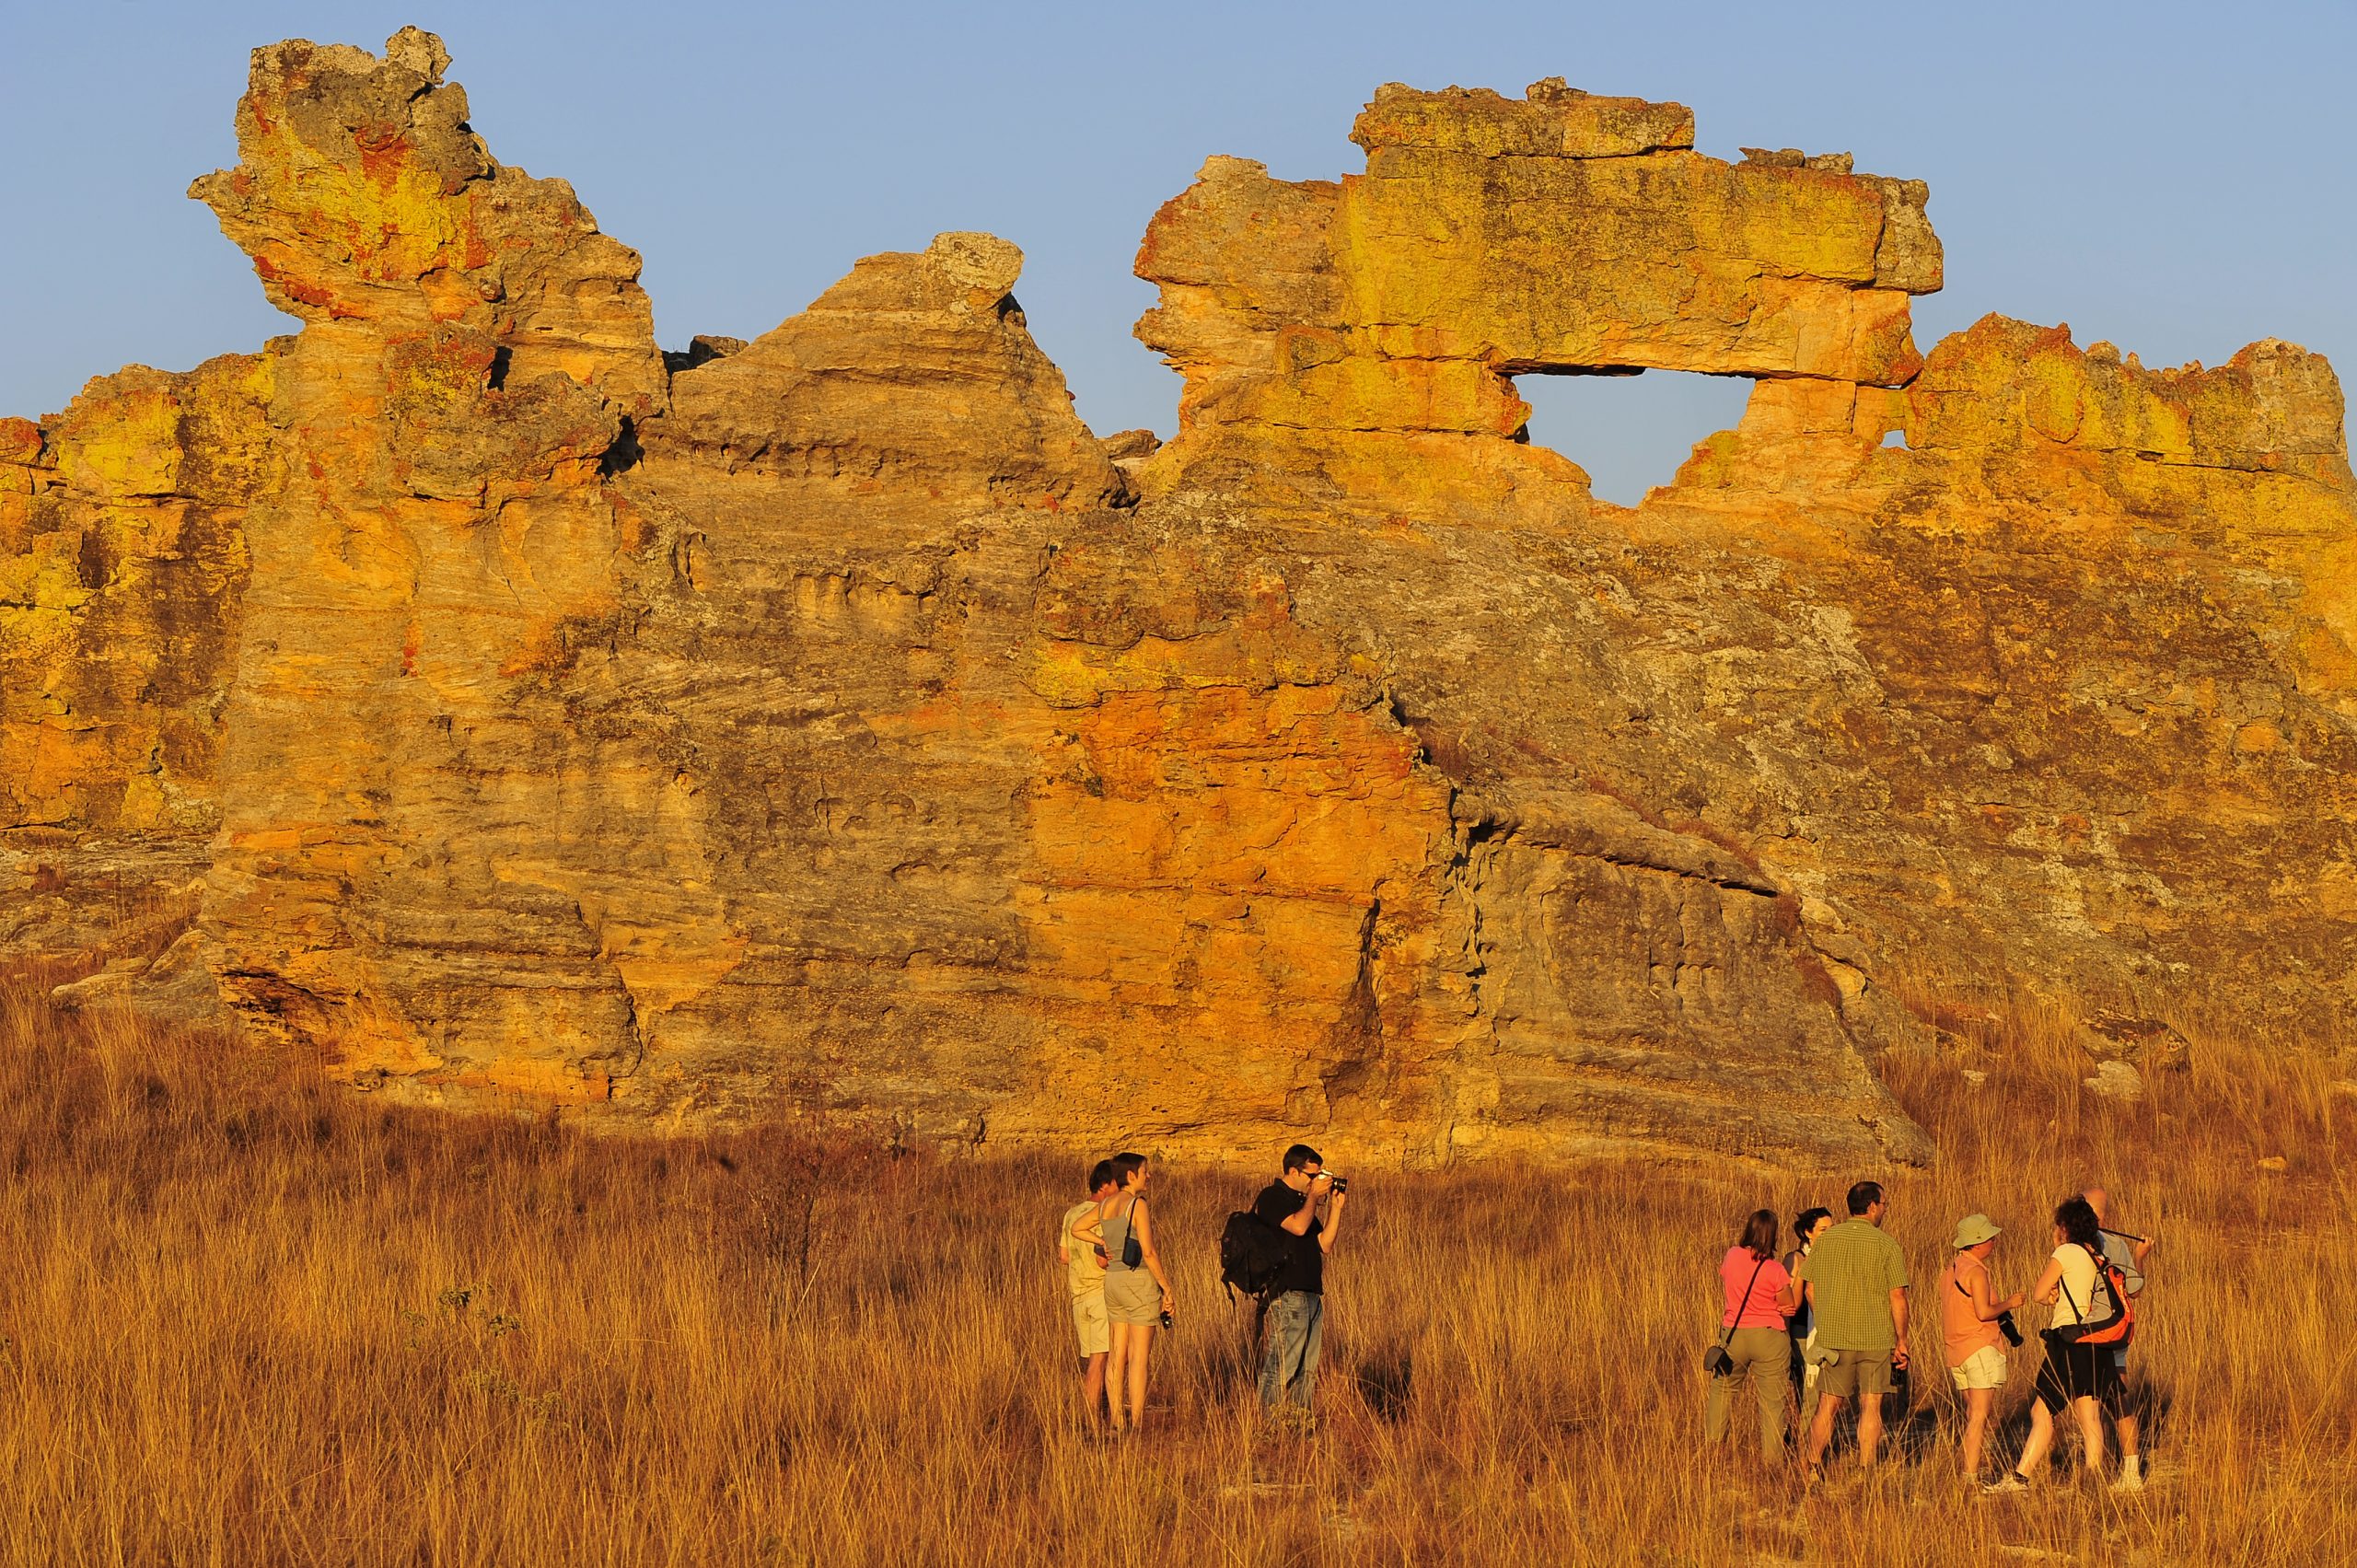 Discovery hike of southern Madagascar